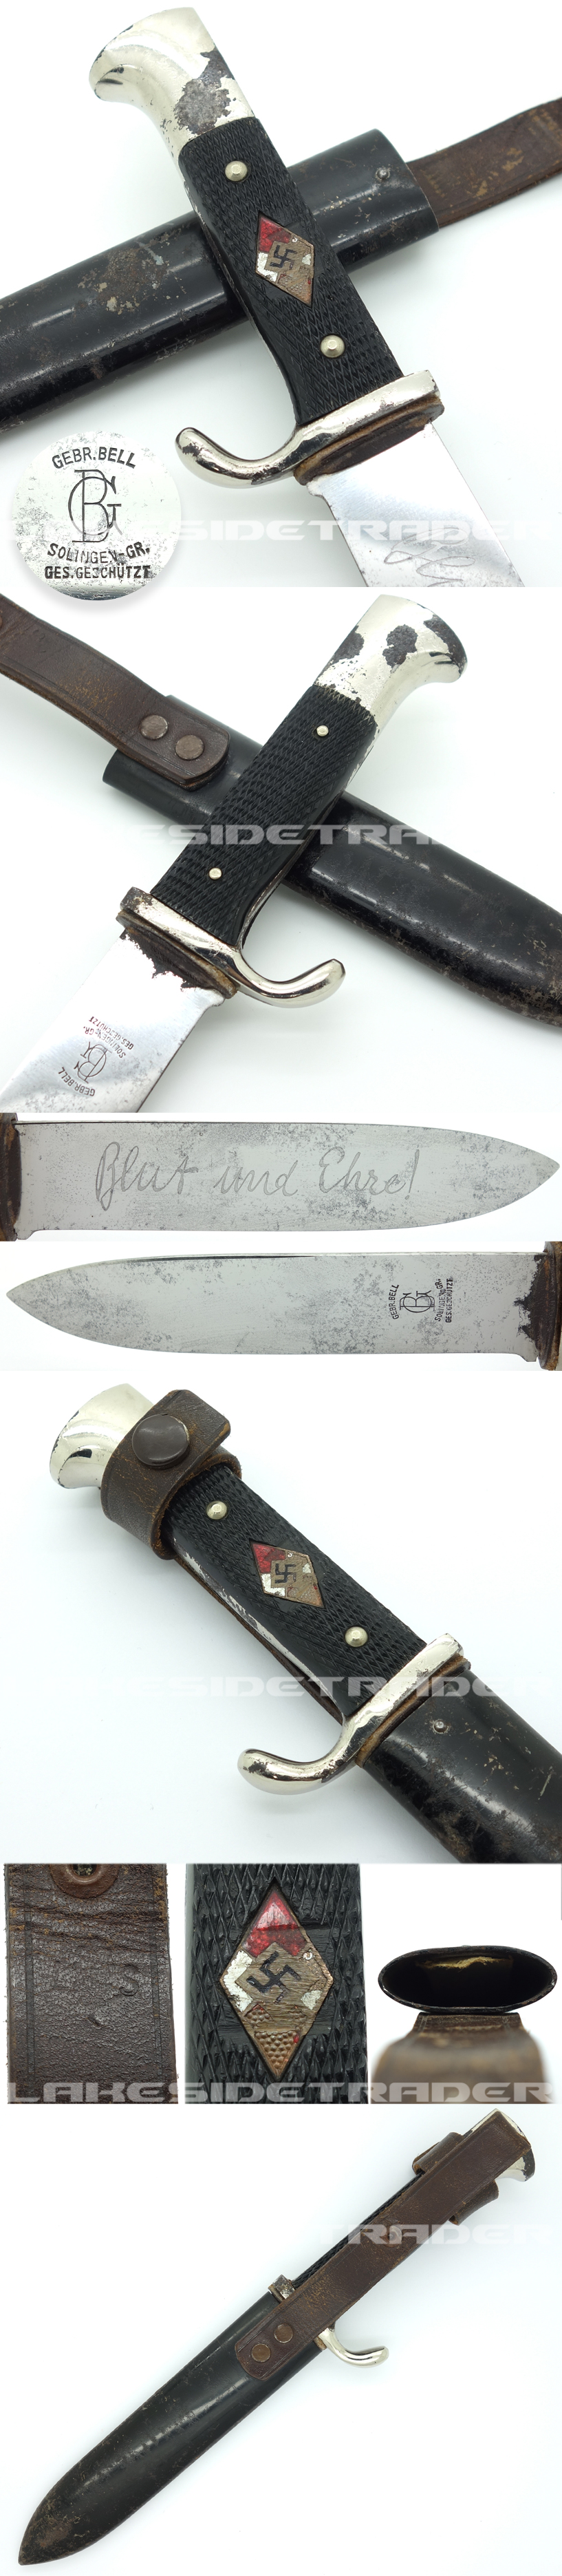 Early Hitler Youth Knife by Gebr. Bell